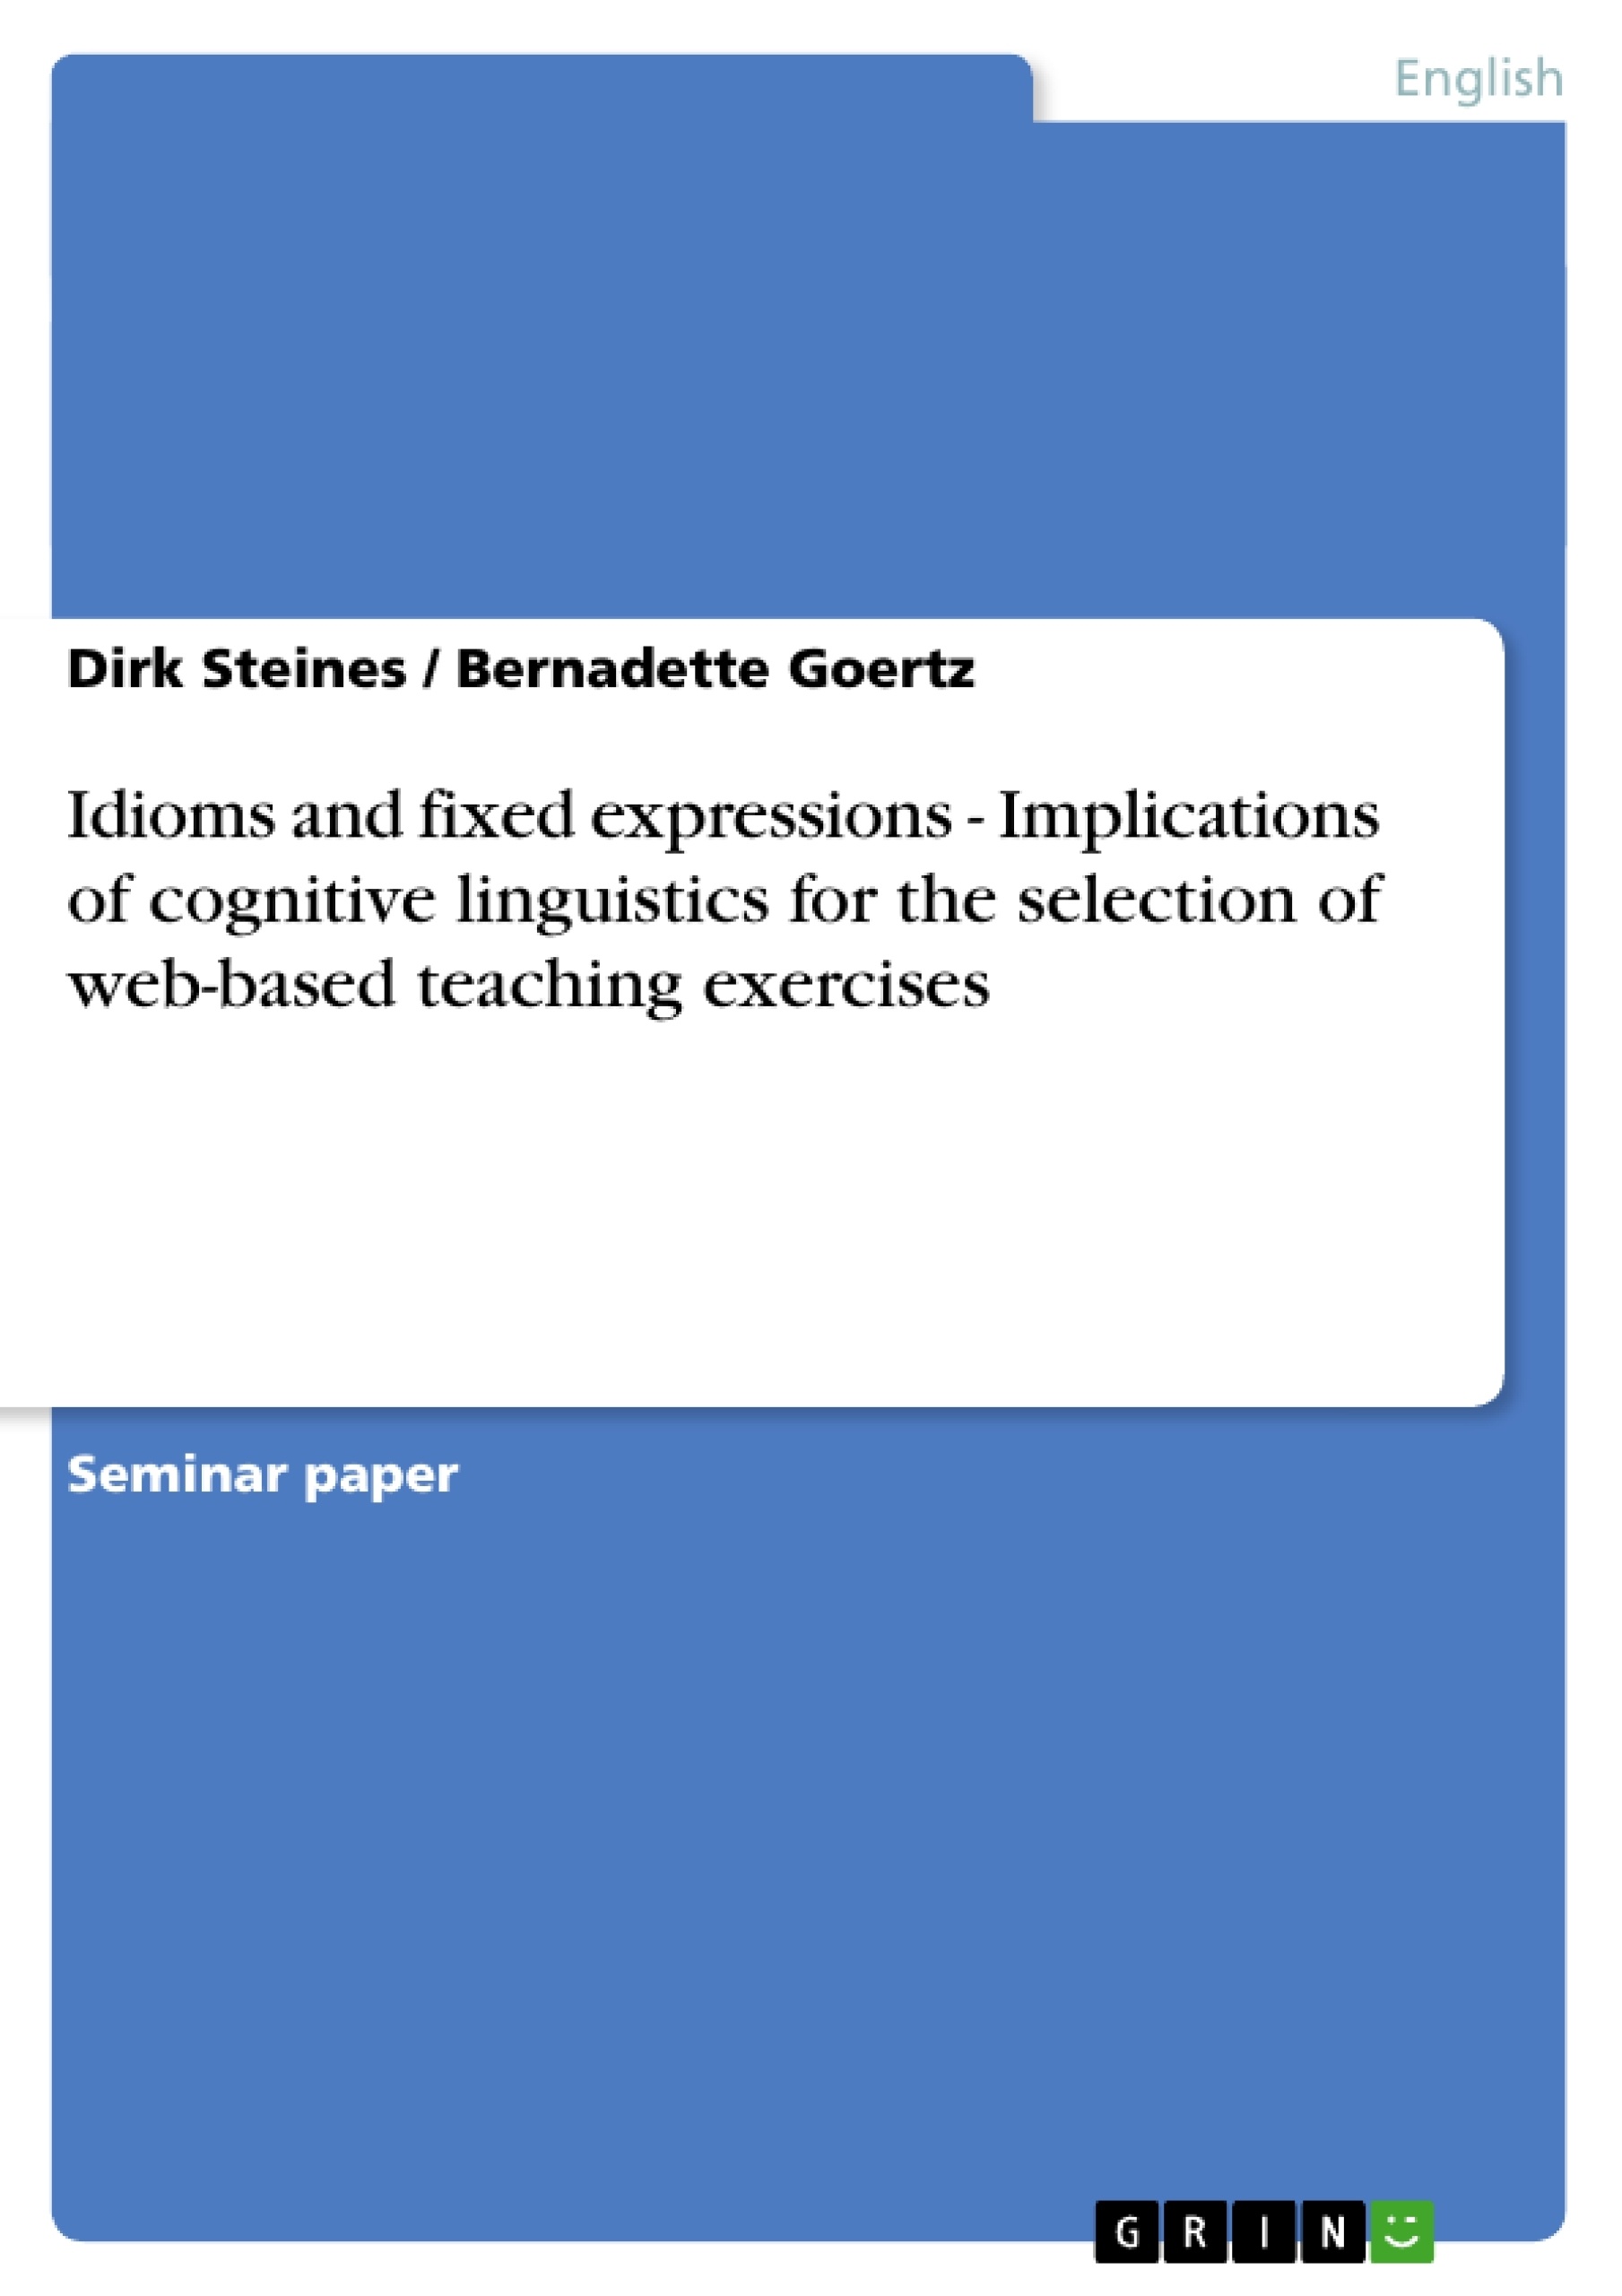 Title: Idioms and fixed expressions - Implications of cognitive linguistics for the selection of web-based teaching exercises